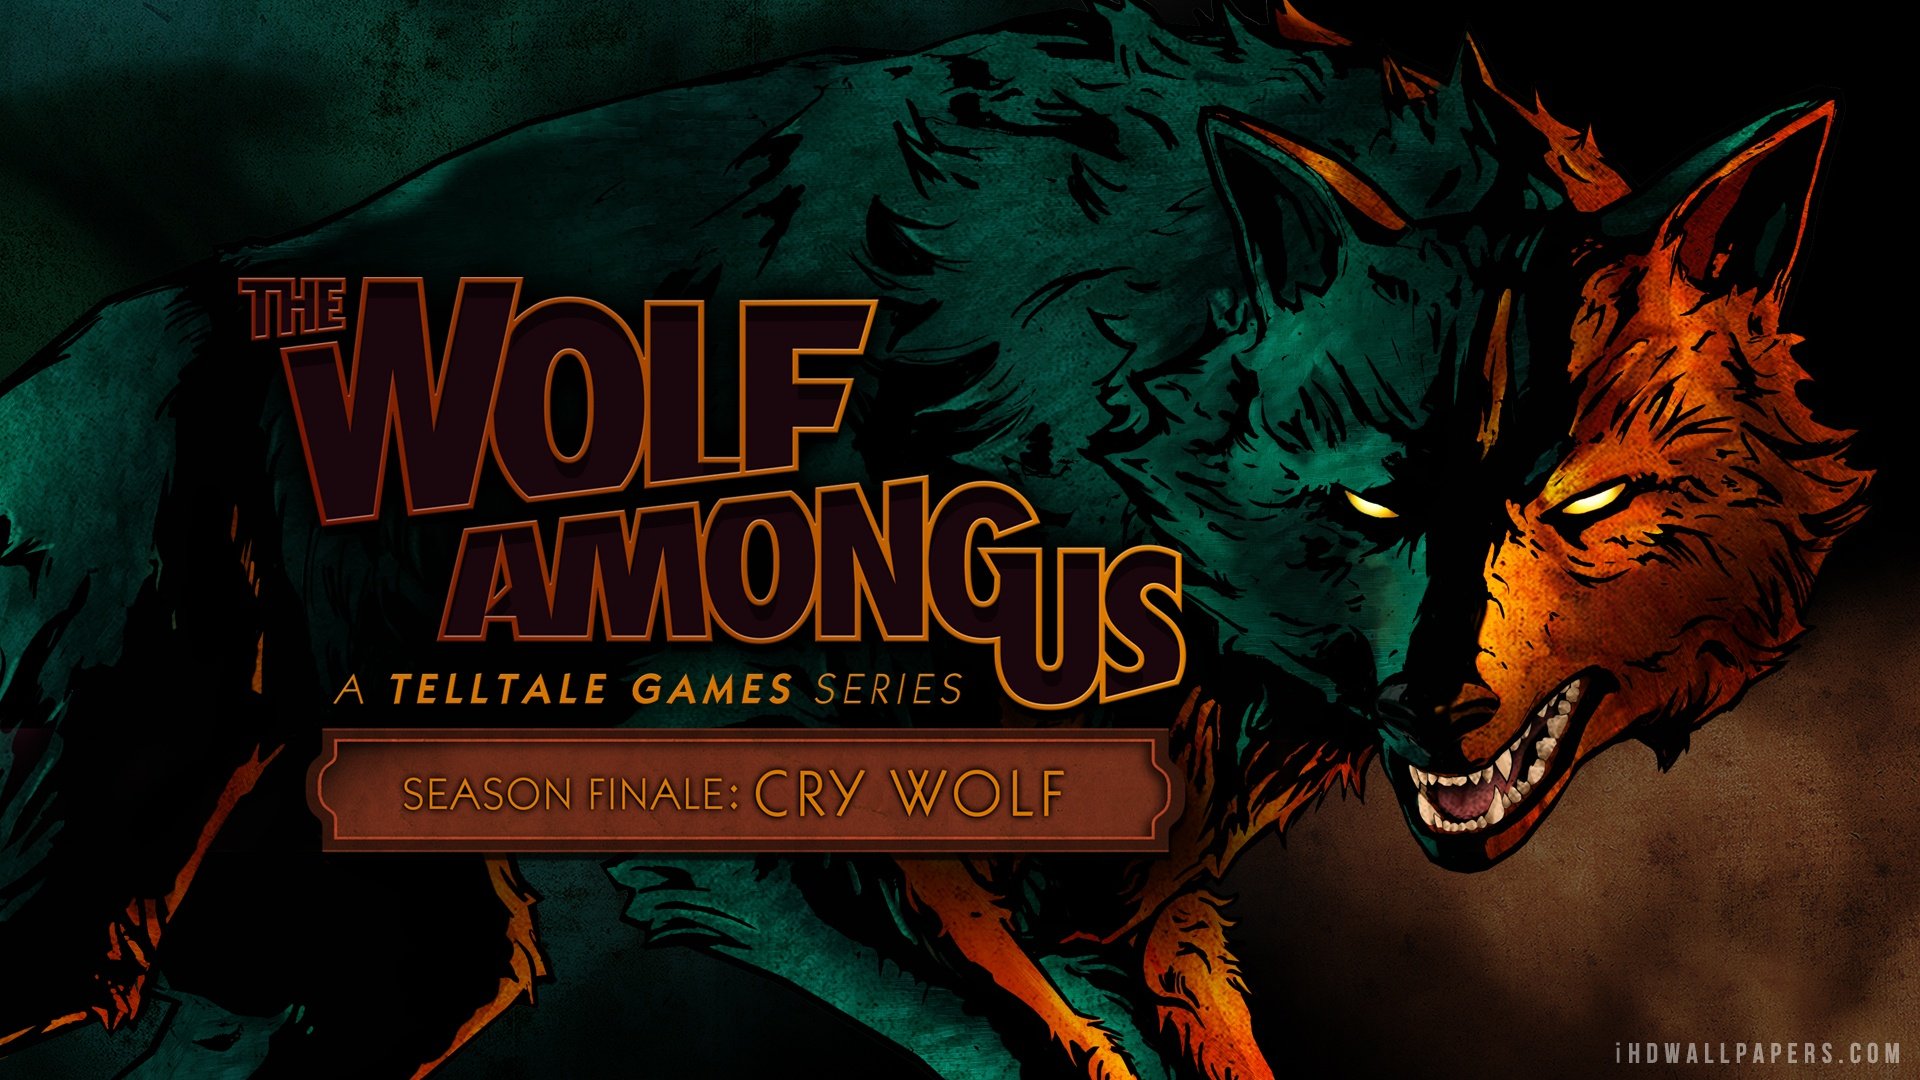 The Wolf Among Us Episode 5 Cry Wolf HD Wallpaper   iHD Wallpapers